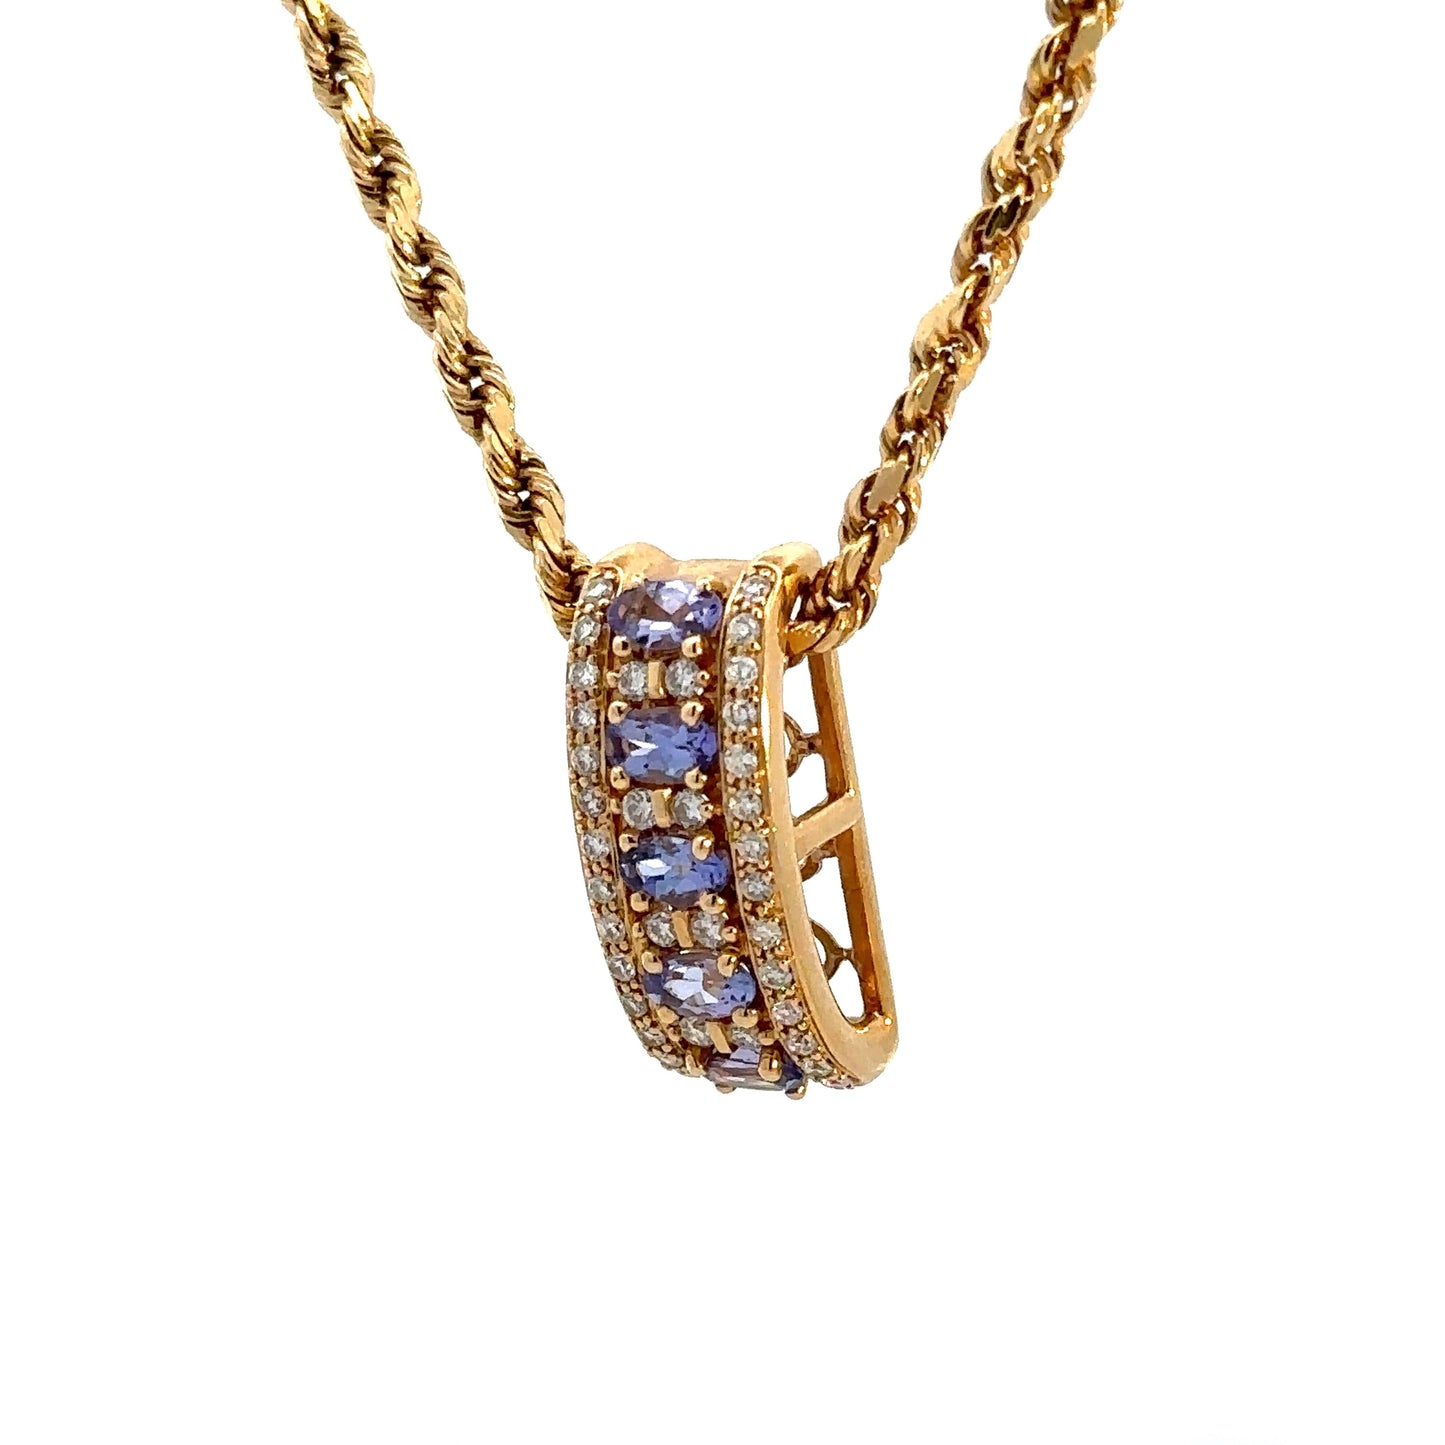 Diagonal view of yellow gold rope chain and yellow gold pendant with diamonds and tanzanite gemstones